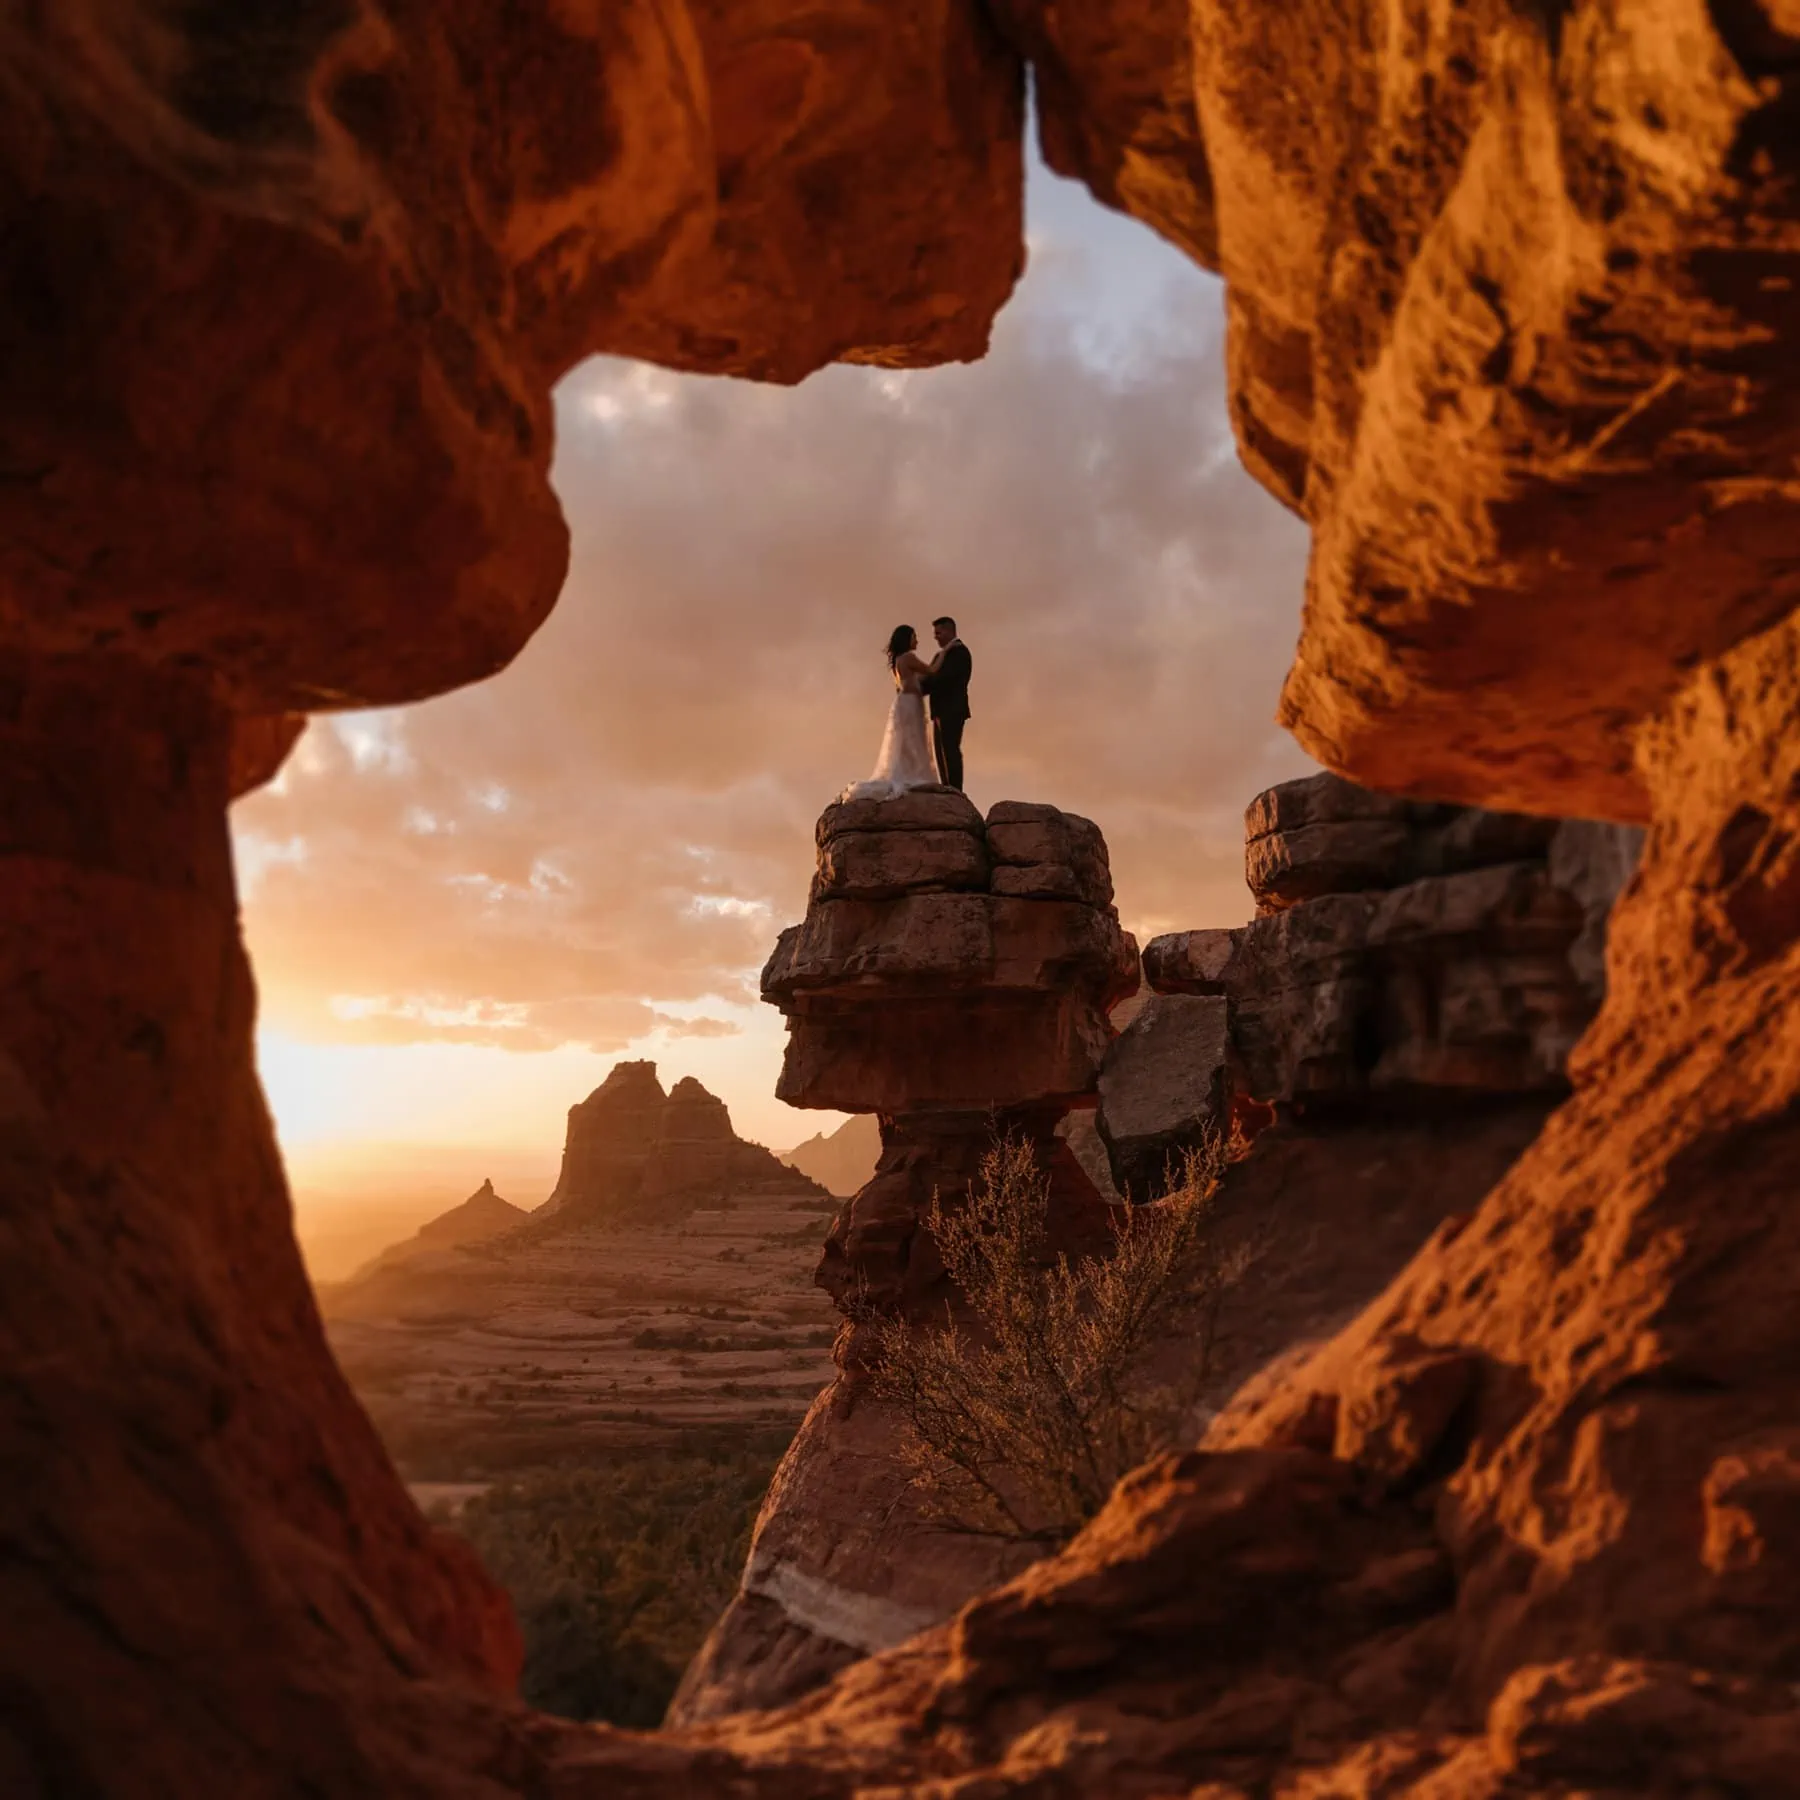 A photo through a keyhole cave of a couple standing on a ledge.